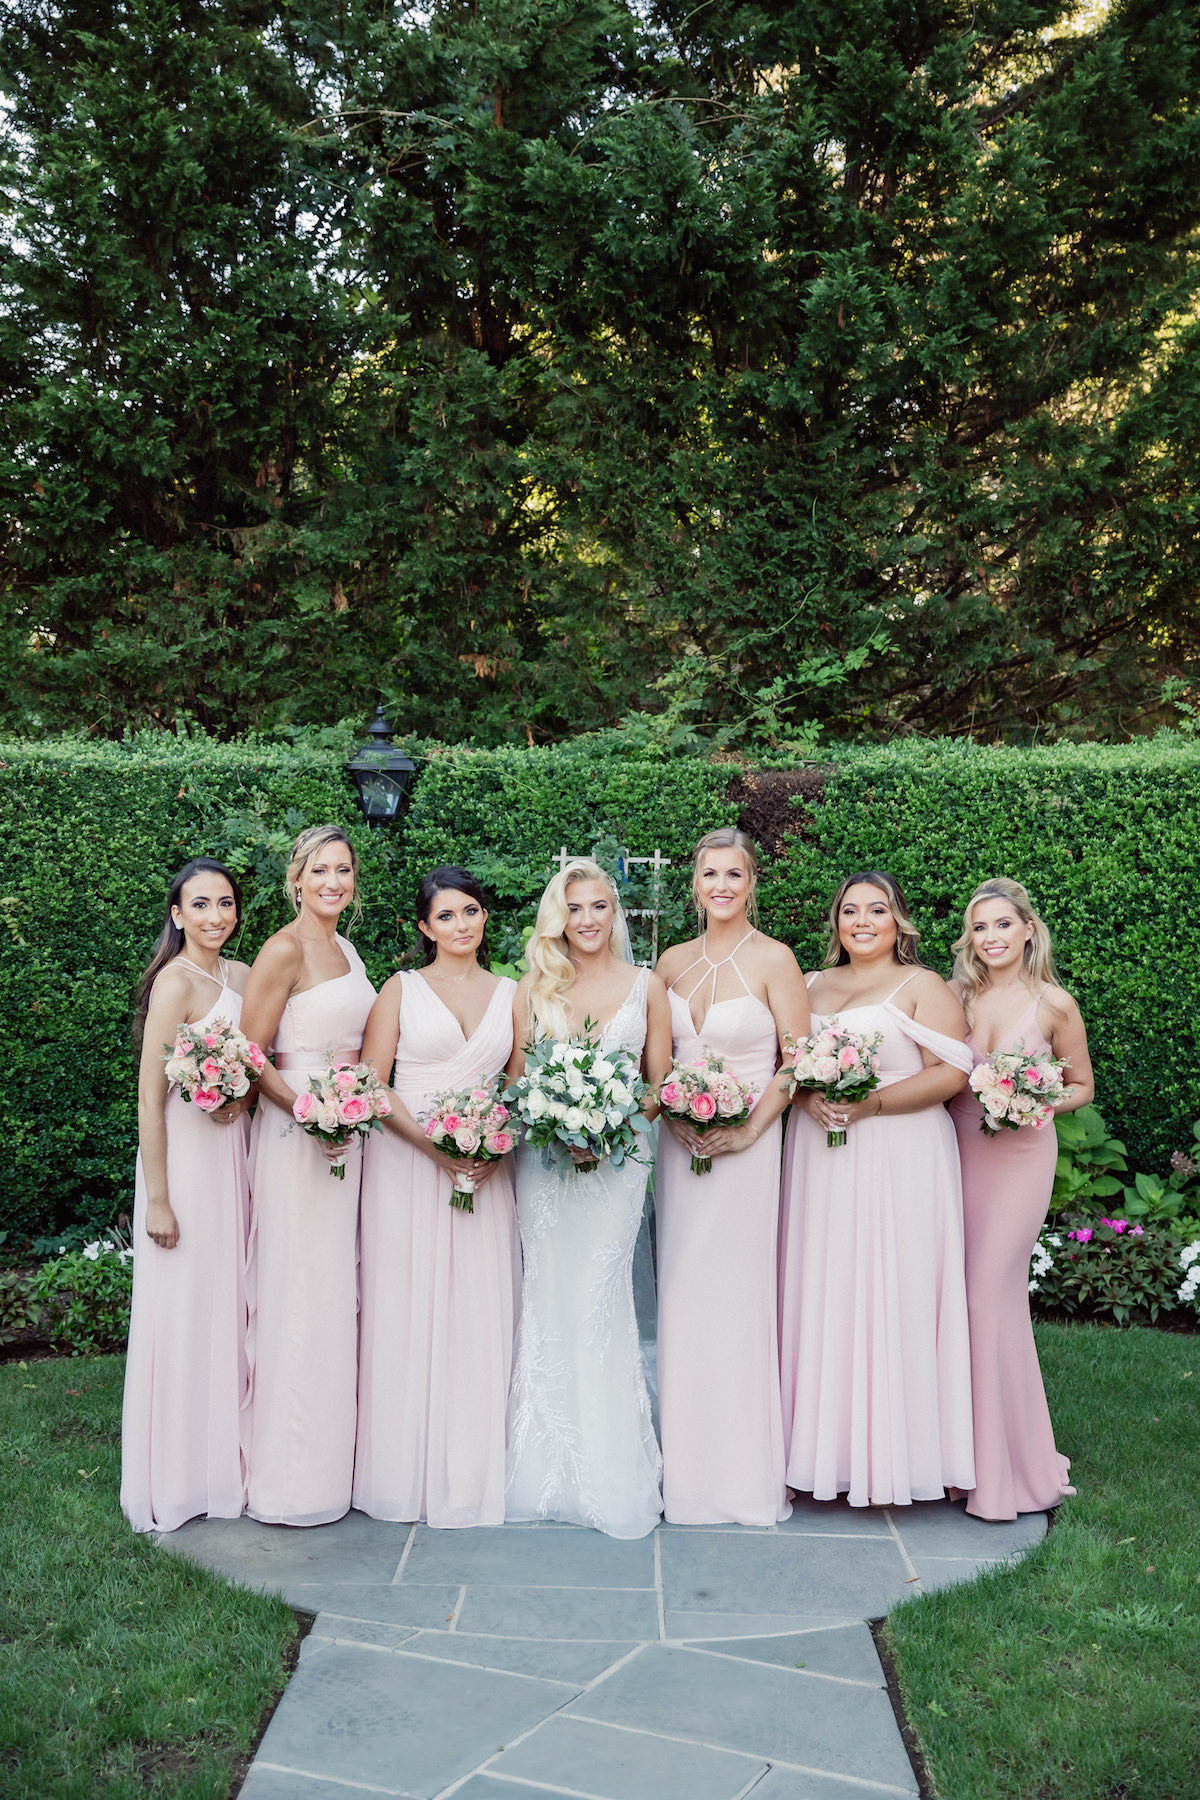 Pink long bridesmaid dresses - Photography: Charming Images